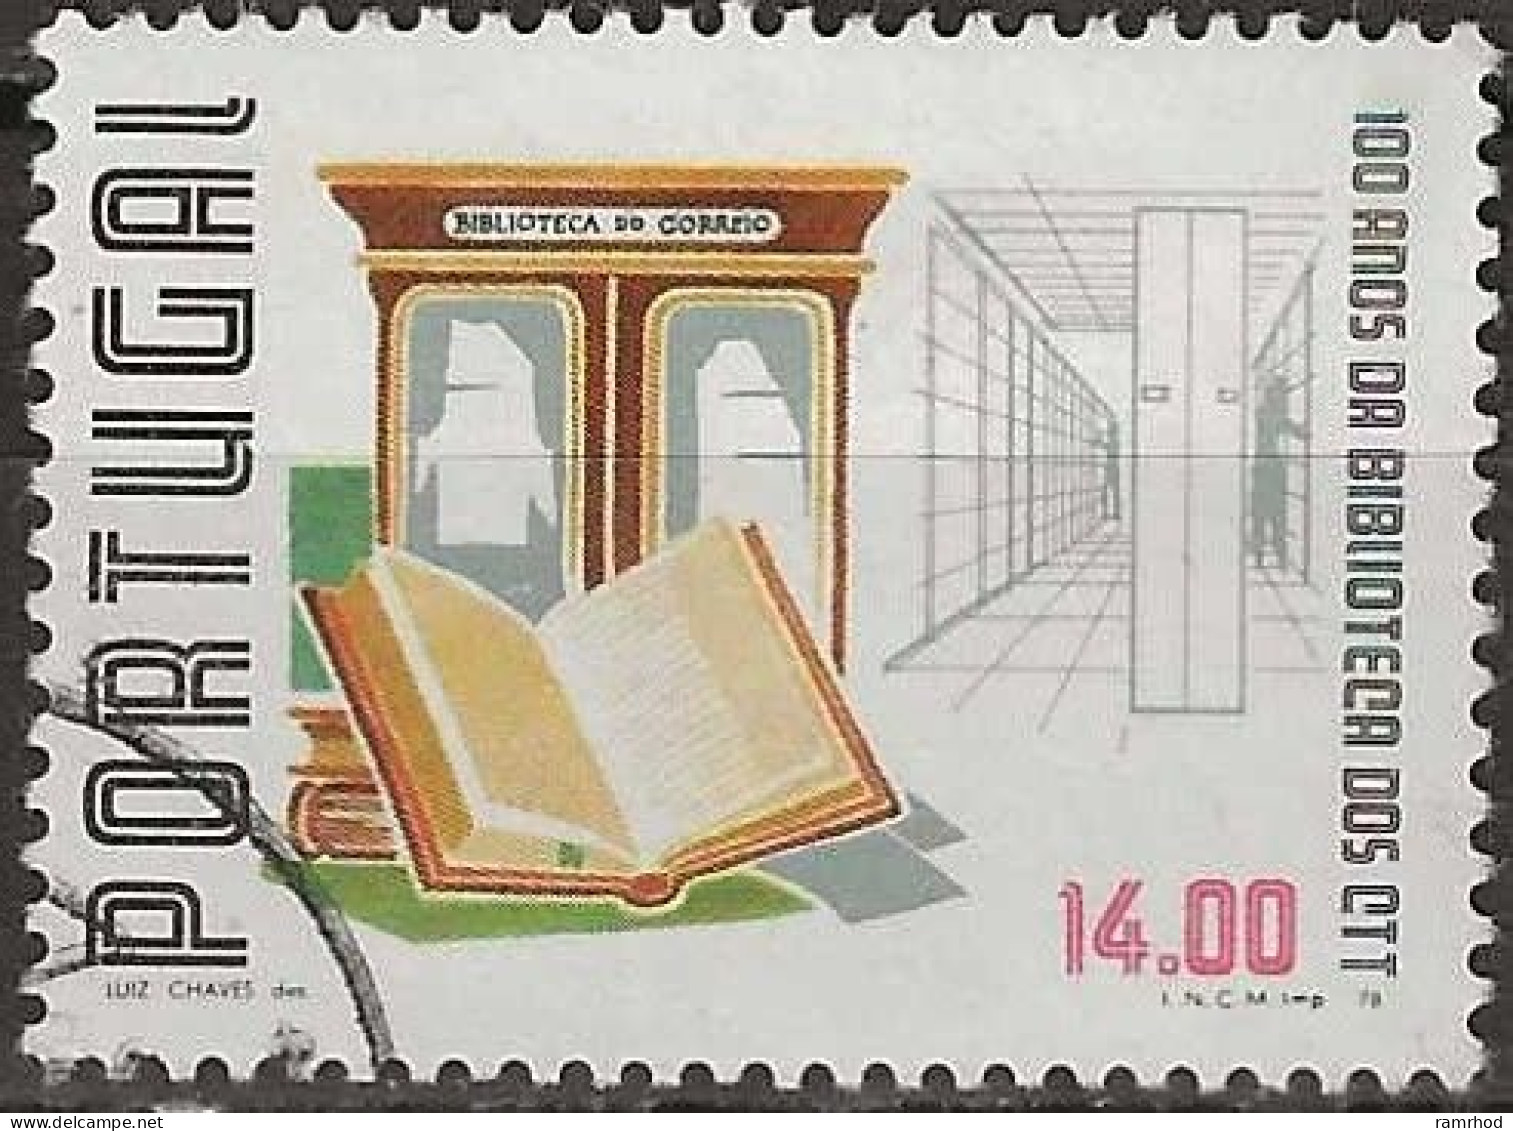 PORTUGAL 1978 Centenary Of Post Museum - 14e. - Books, Bookcase And Entrance To Postal Library (centenary) FU - Used Stamps